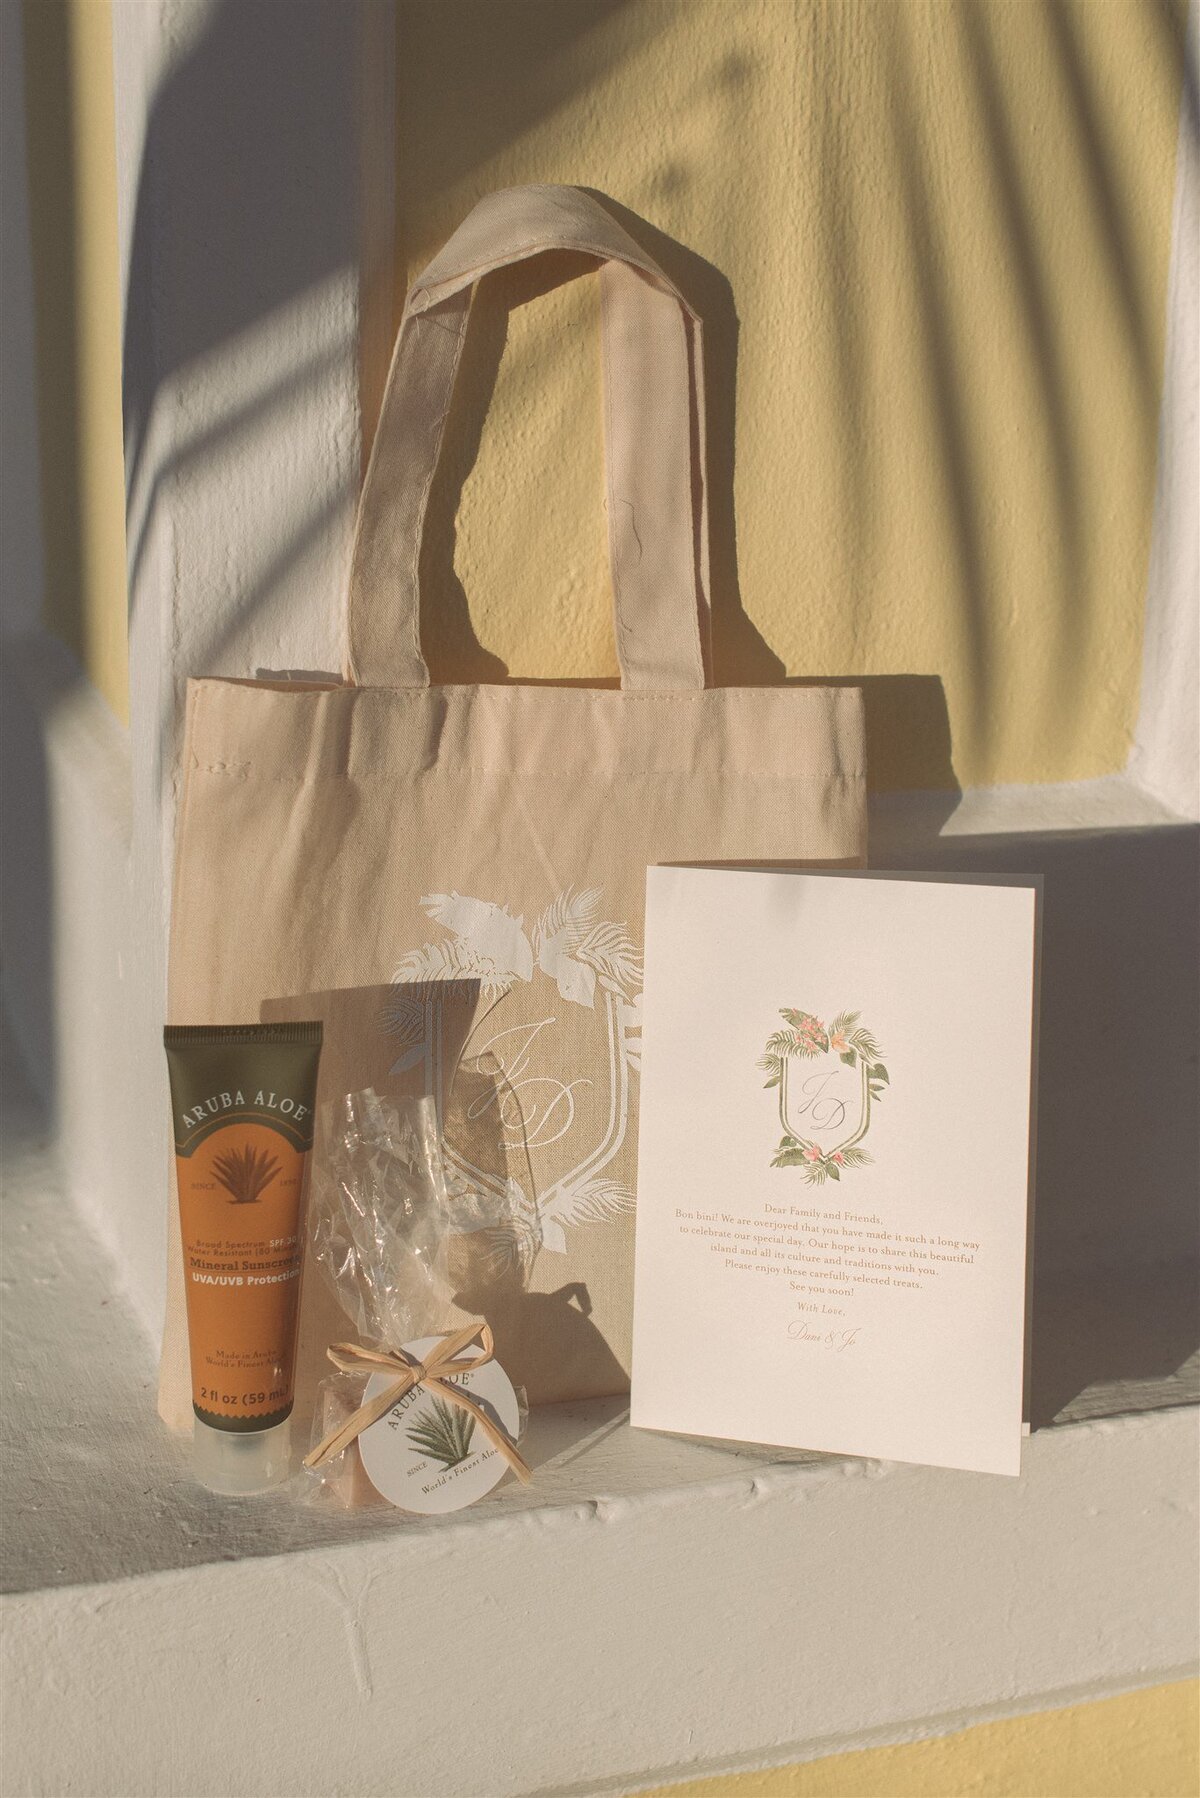 wedding stationery welcome bag including custom tote, custom welcome card and soap and sunscreen from aruba